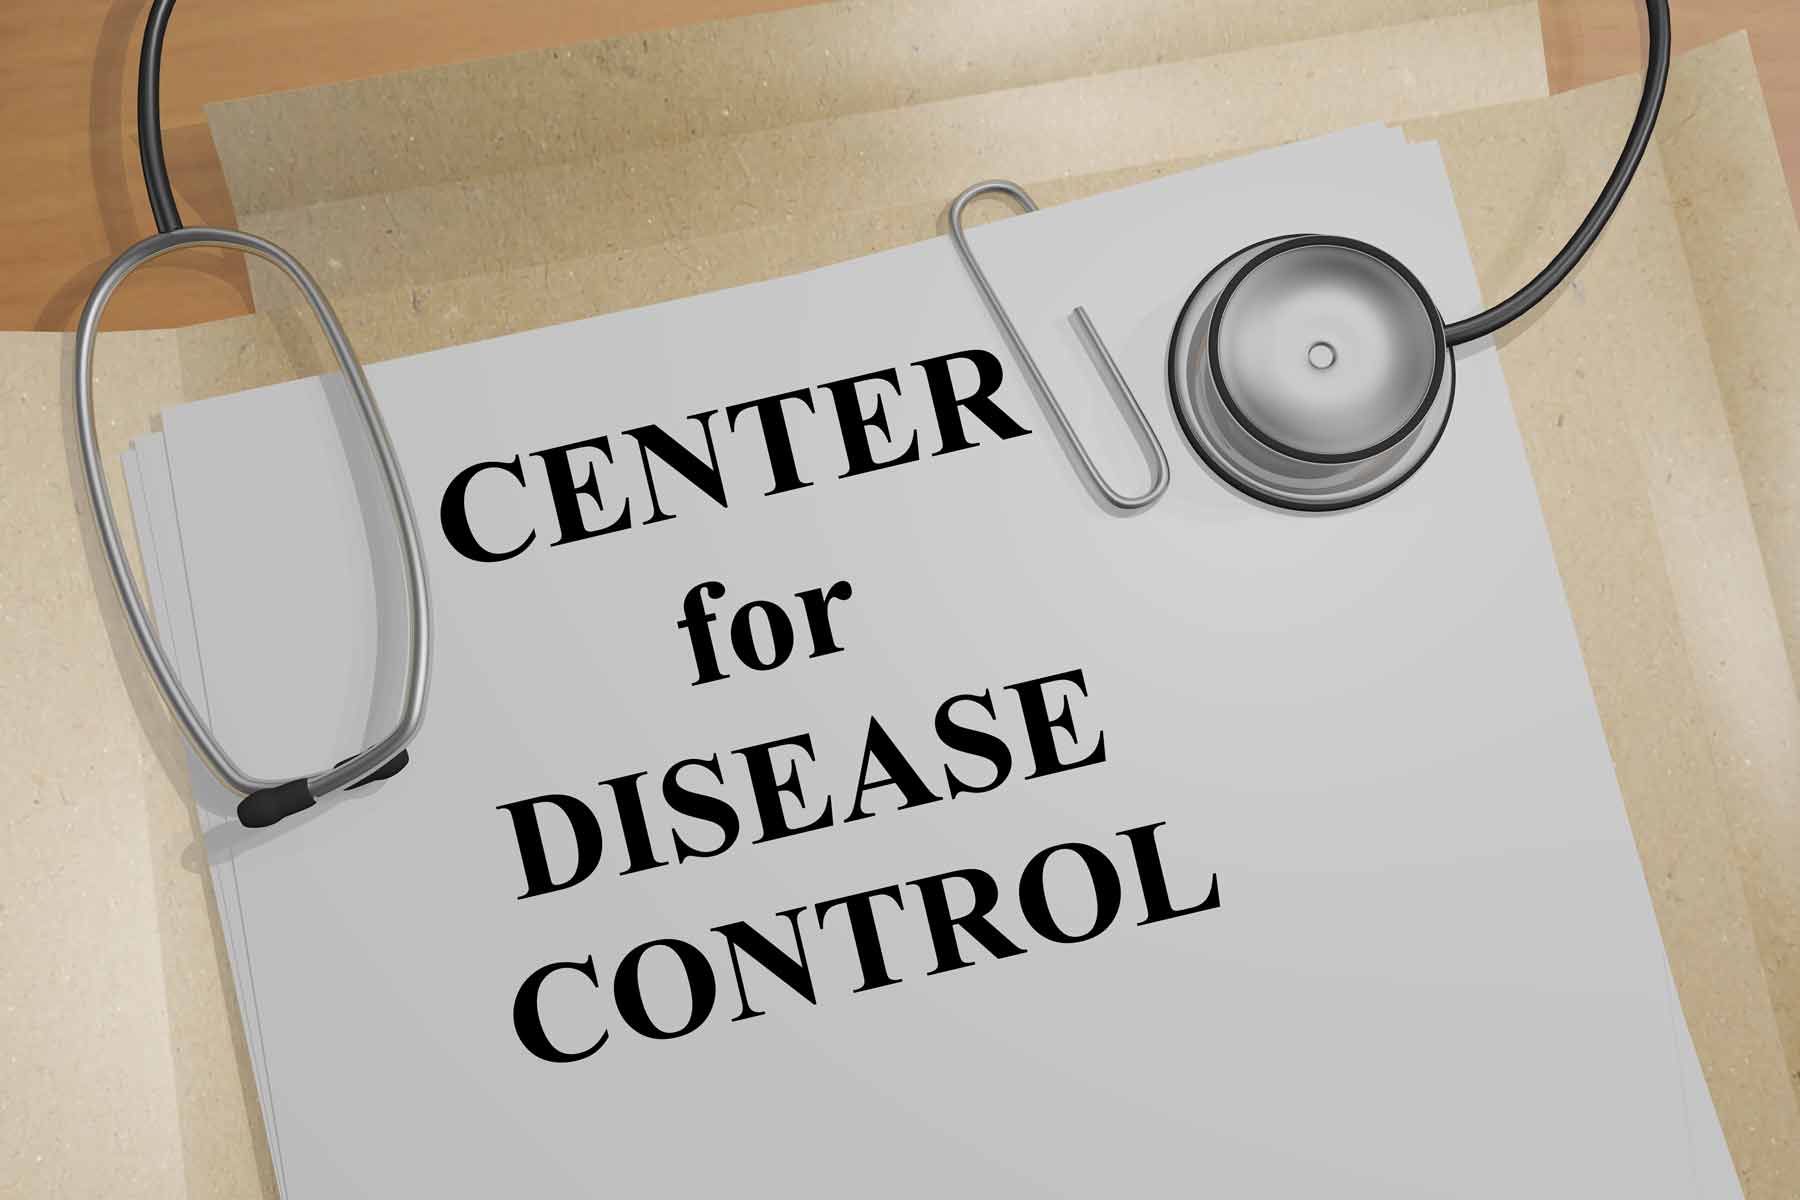 Centers for Disease Control Folder